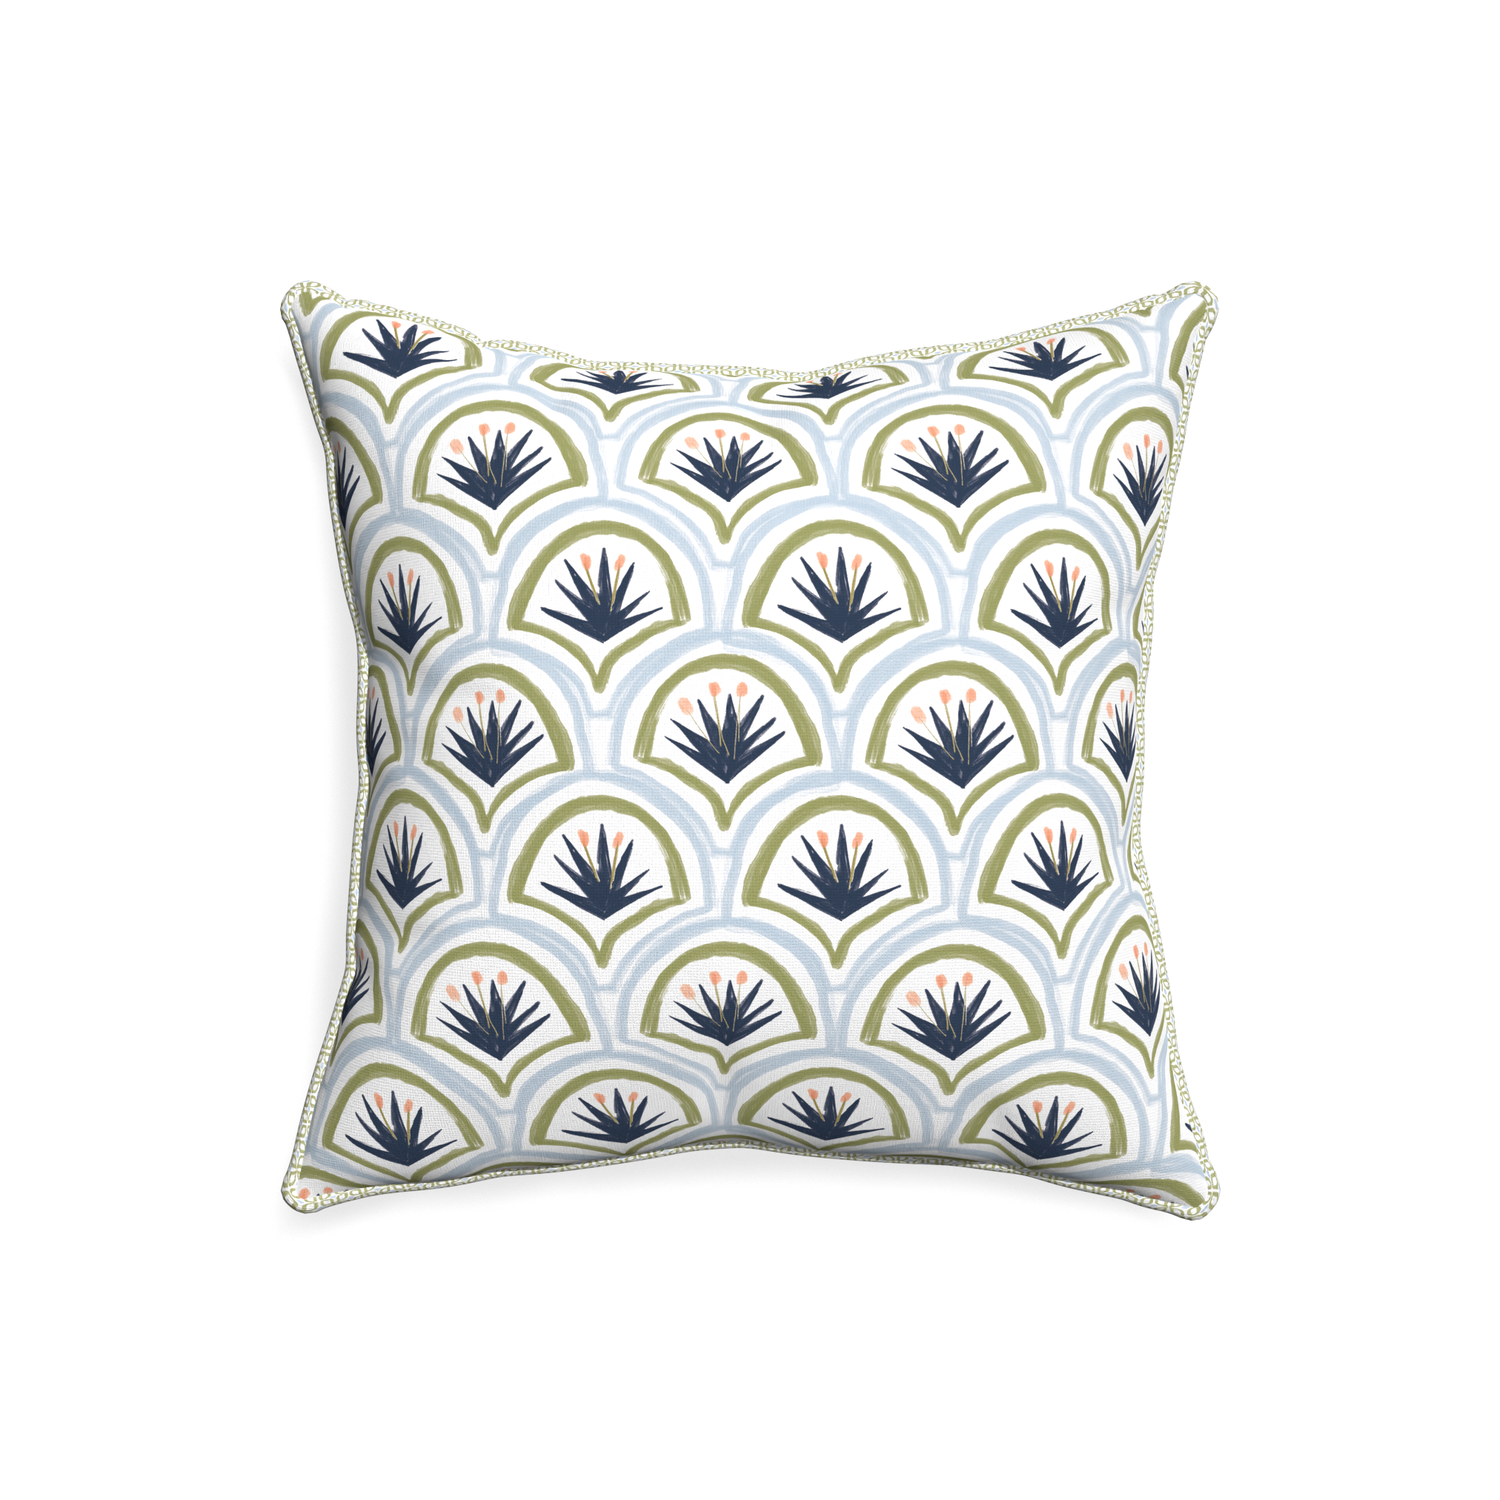 20-square thatcher midnight custom art deco palm patternpillow with l piping on white background